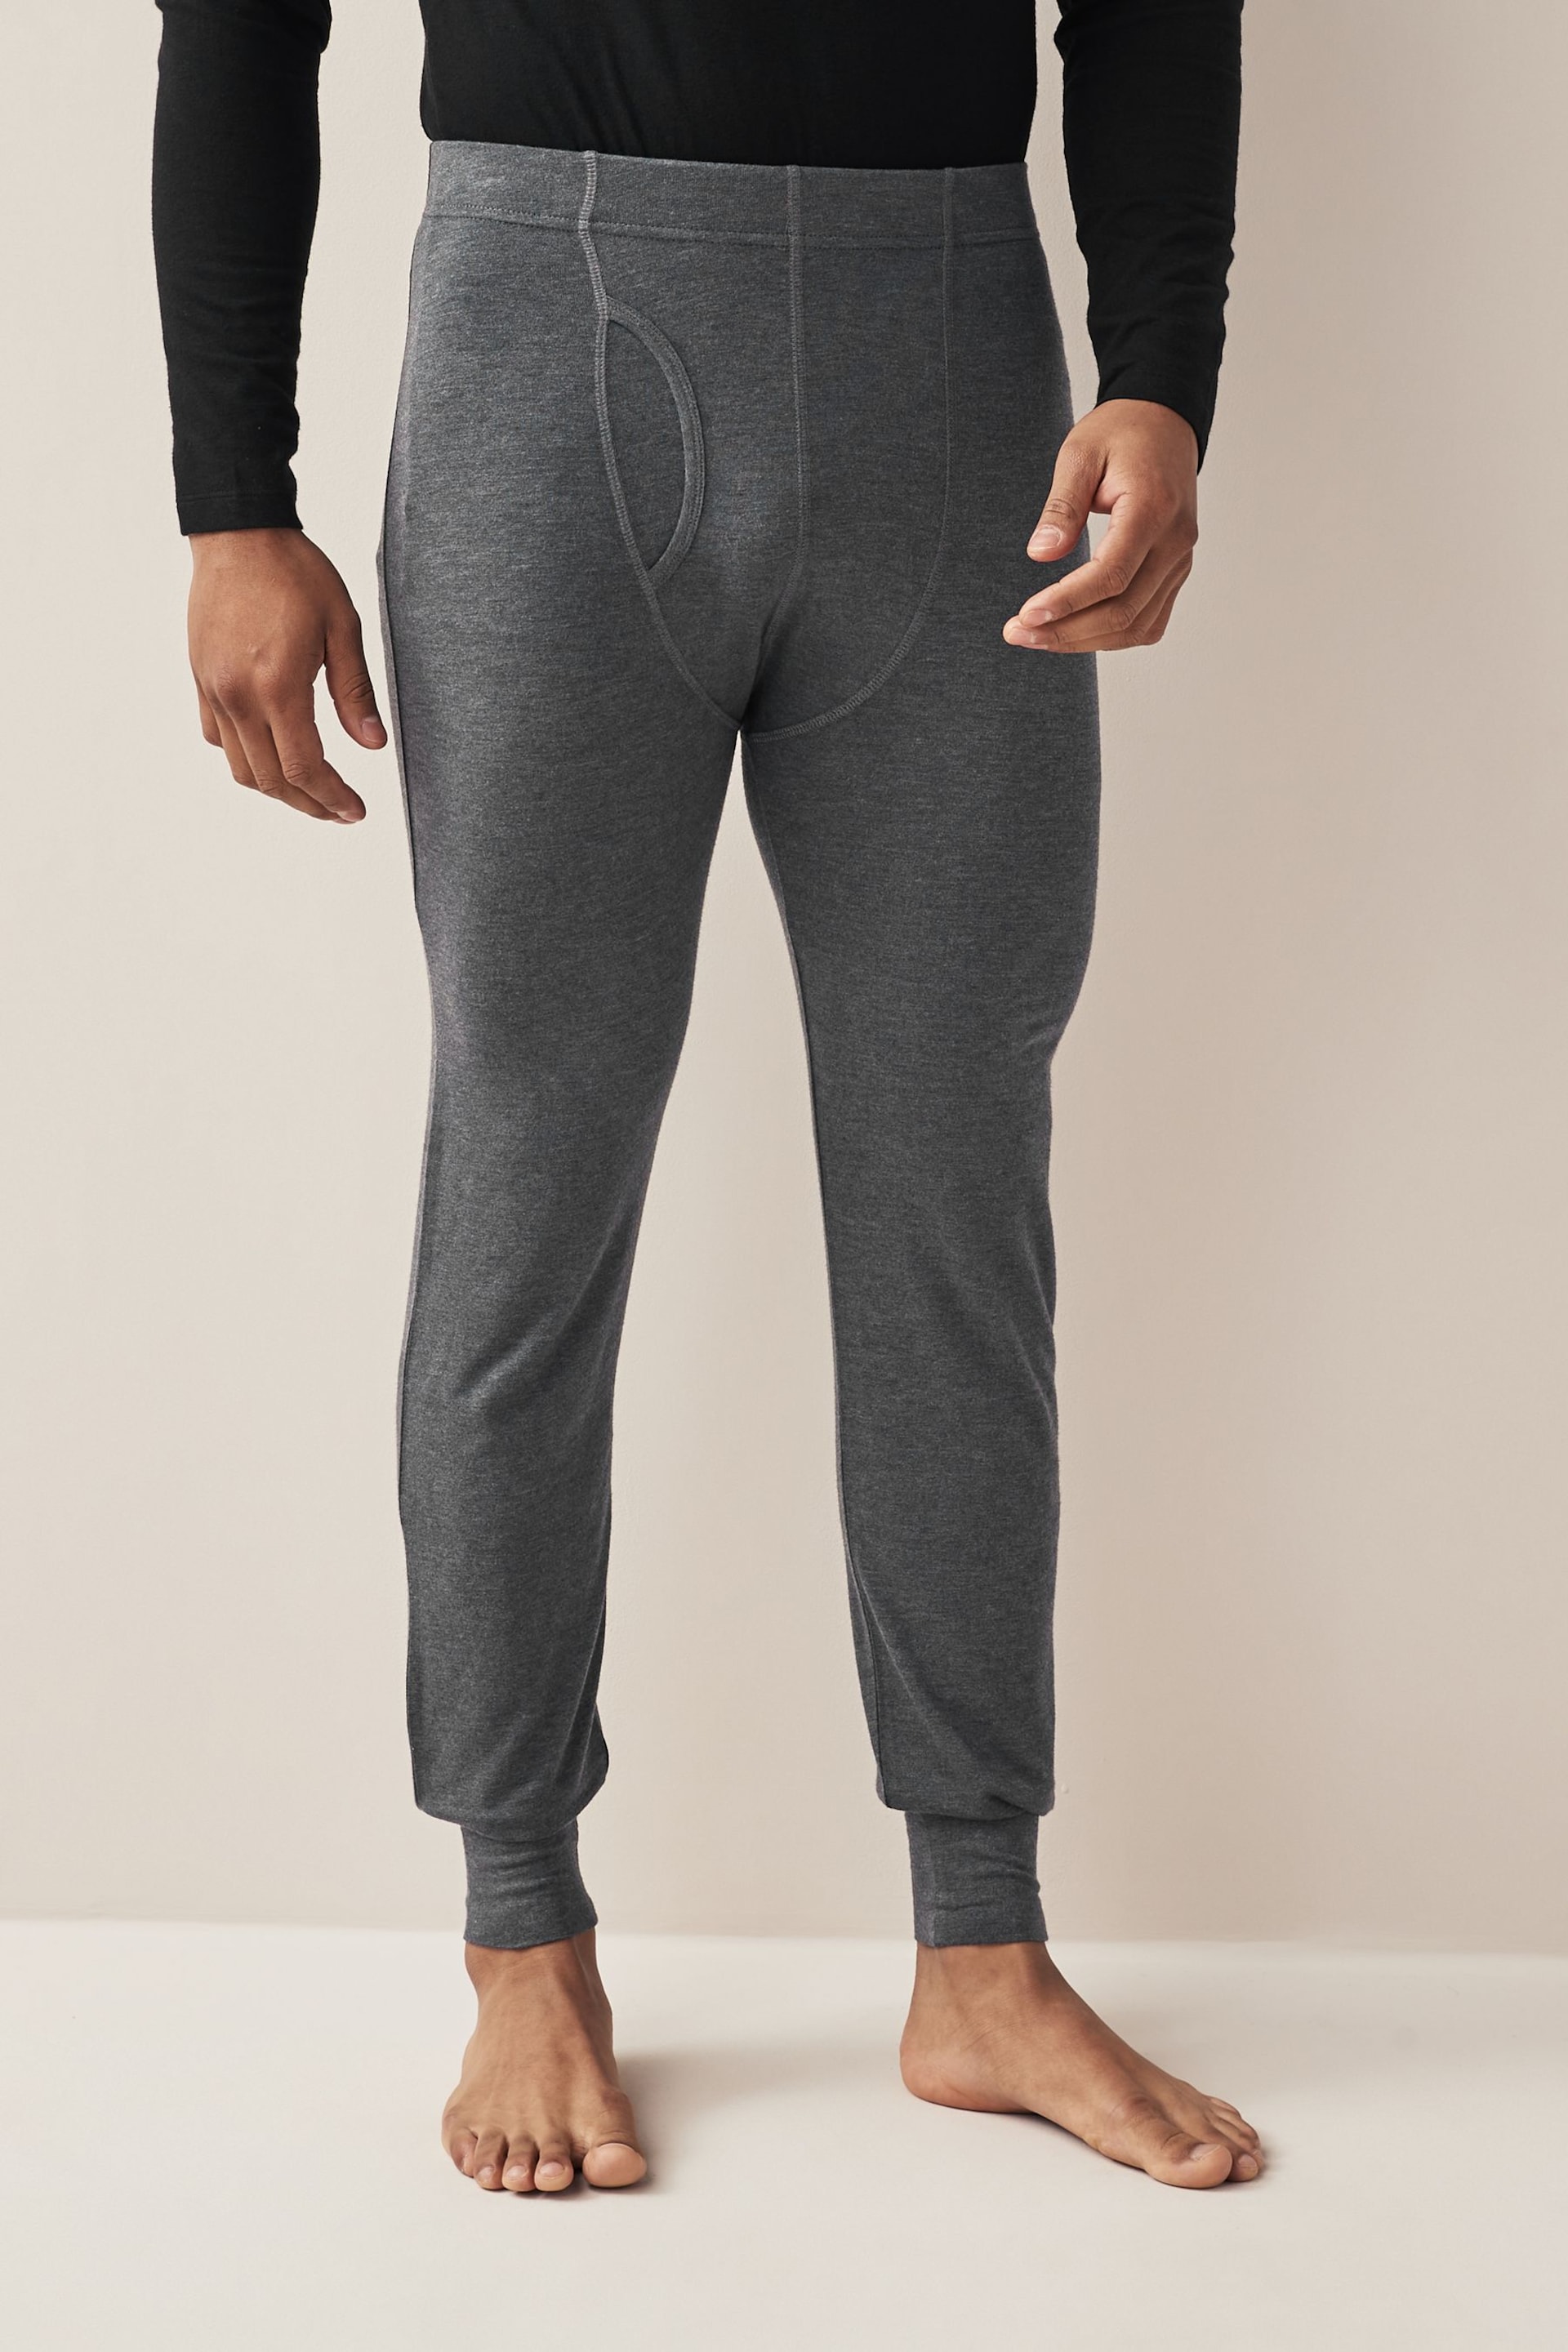 Black/Grey 2 Pack Lightweight Thermal Long Johns - Image 2 of 10